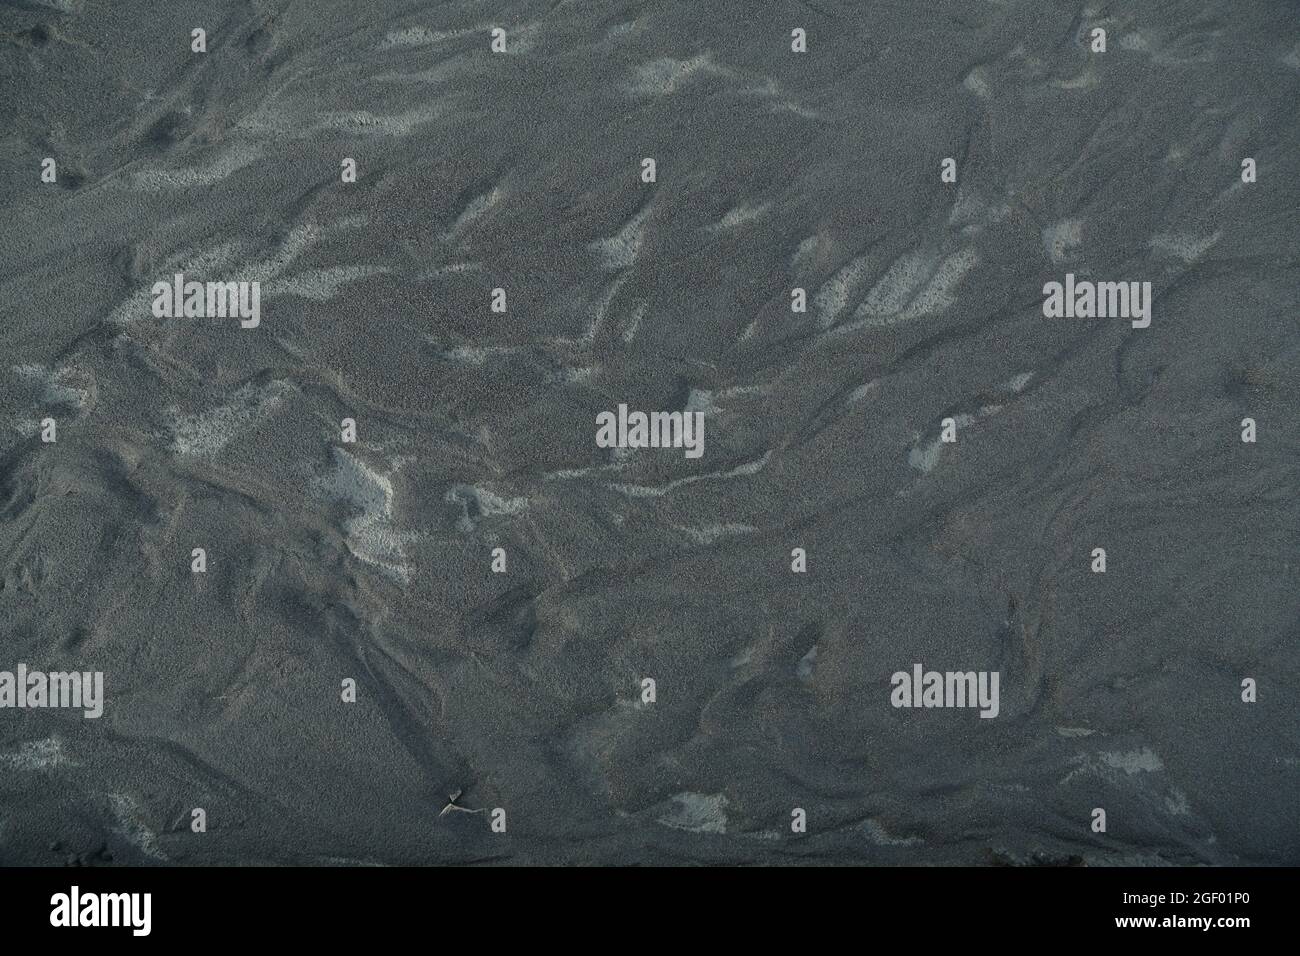 Fine black earth texture with various shapes and elements Stock Photo